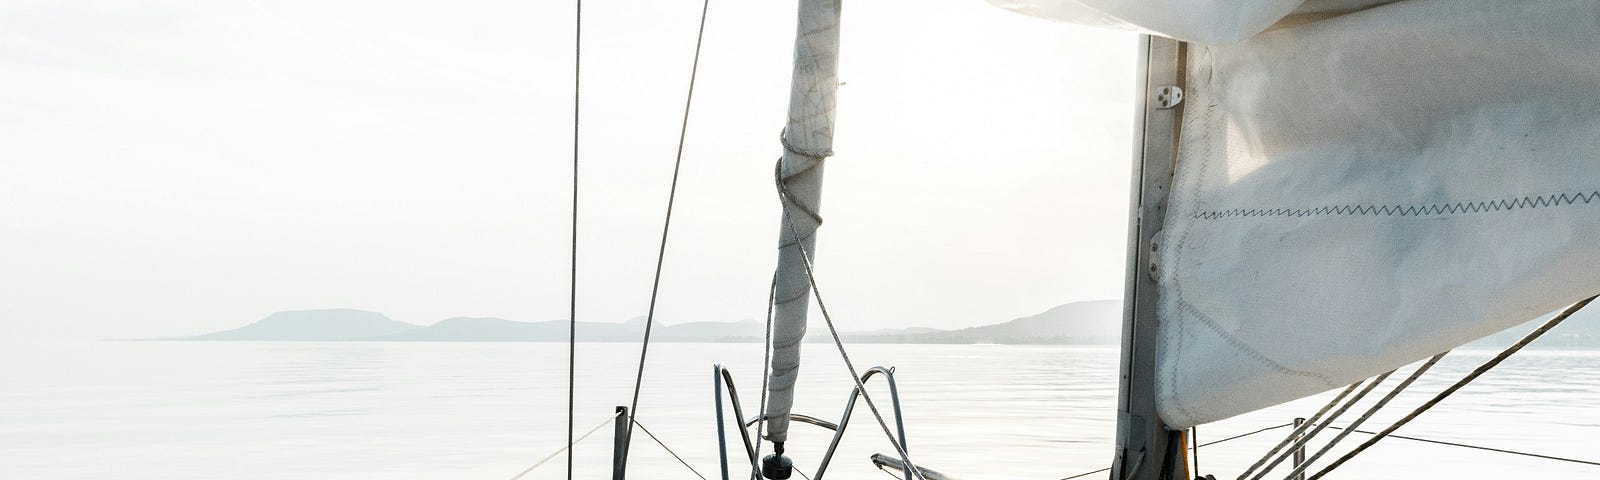 The front of a sailboat floating on the water — from the perspective of the sailor.